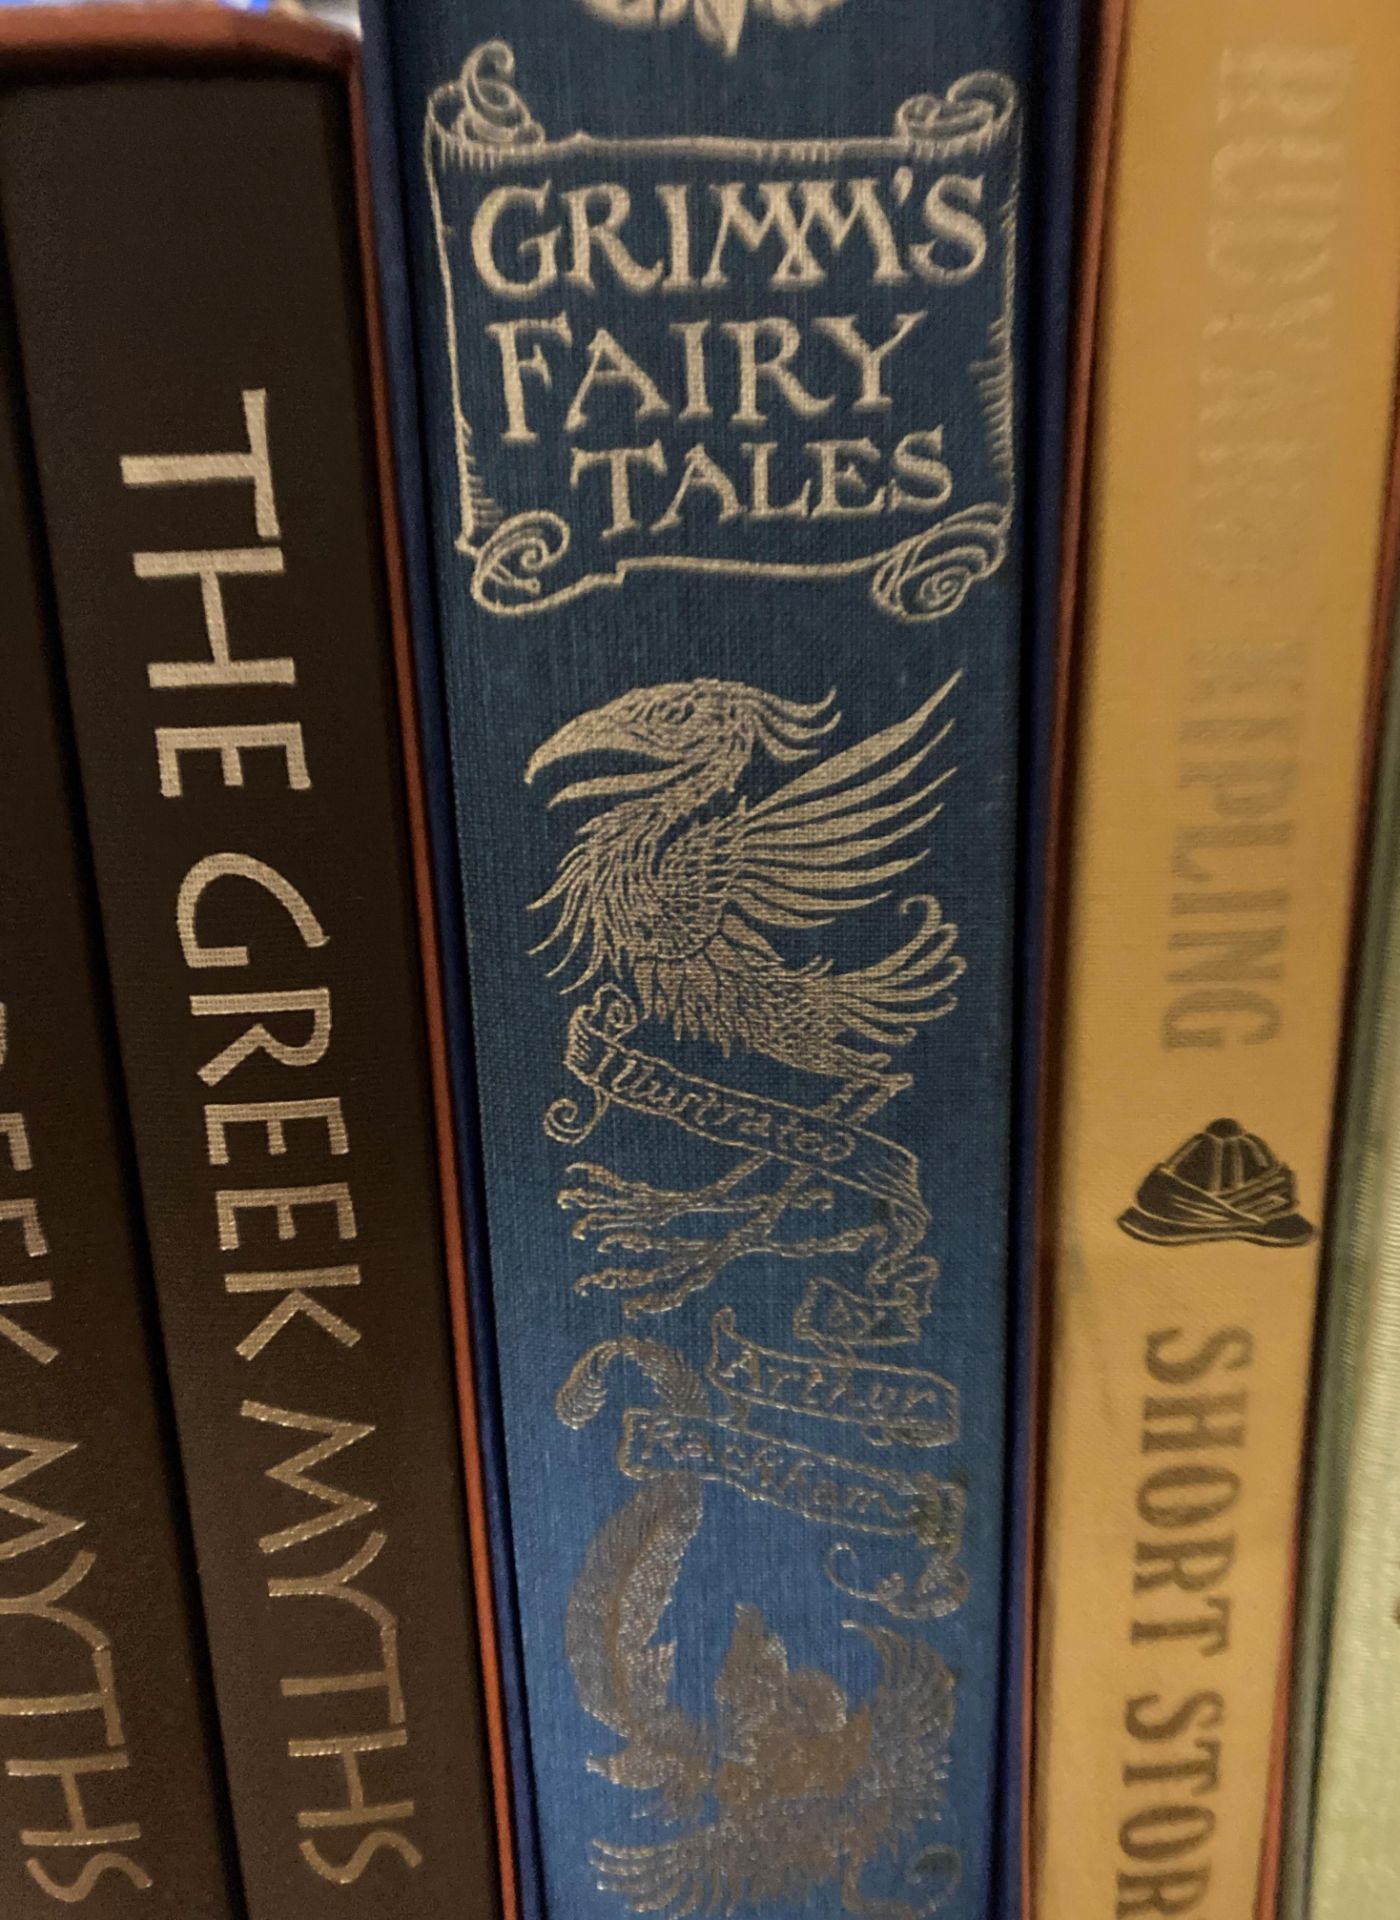 Folio Society - six books including Hans Andersen's Fairy Tales with illustrations by W Heath - Image 2 of 2